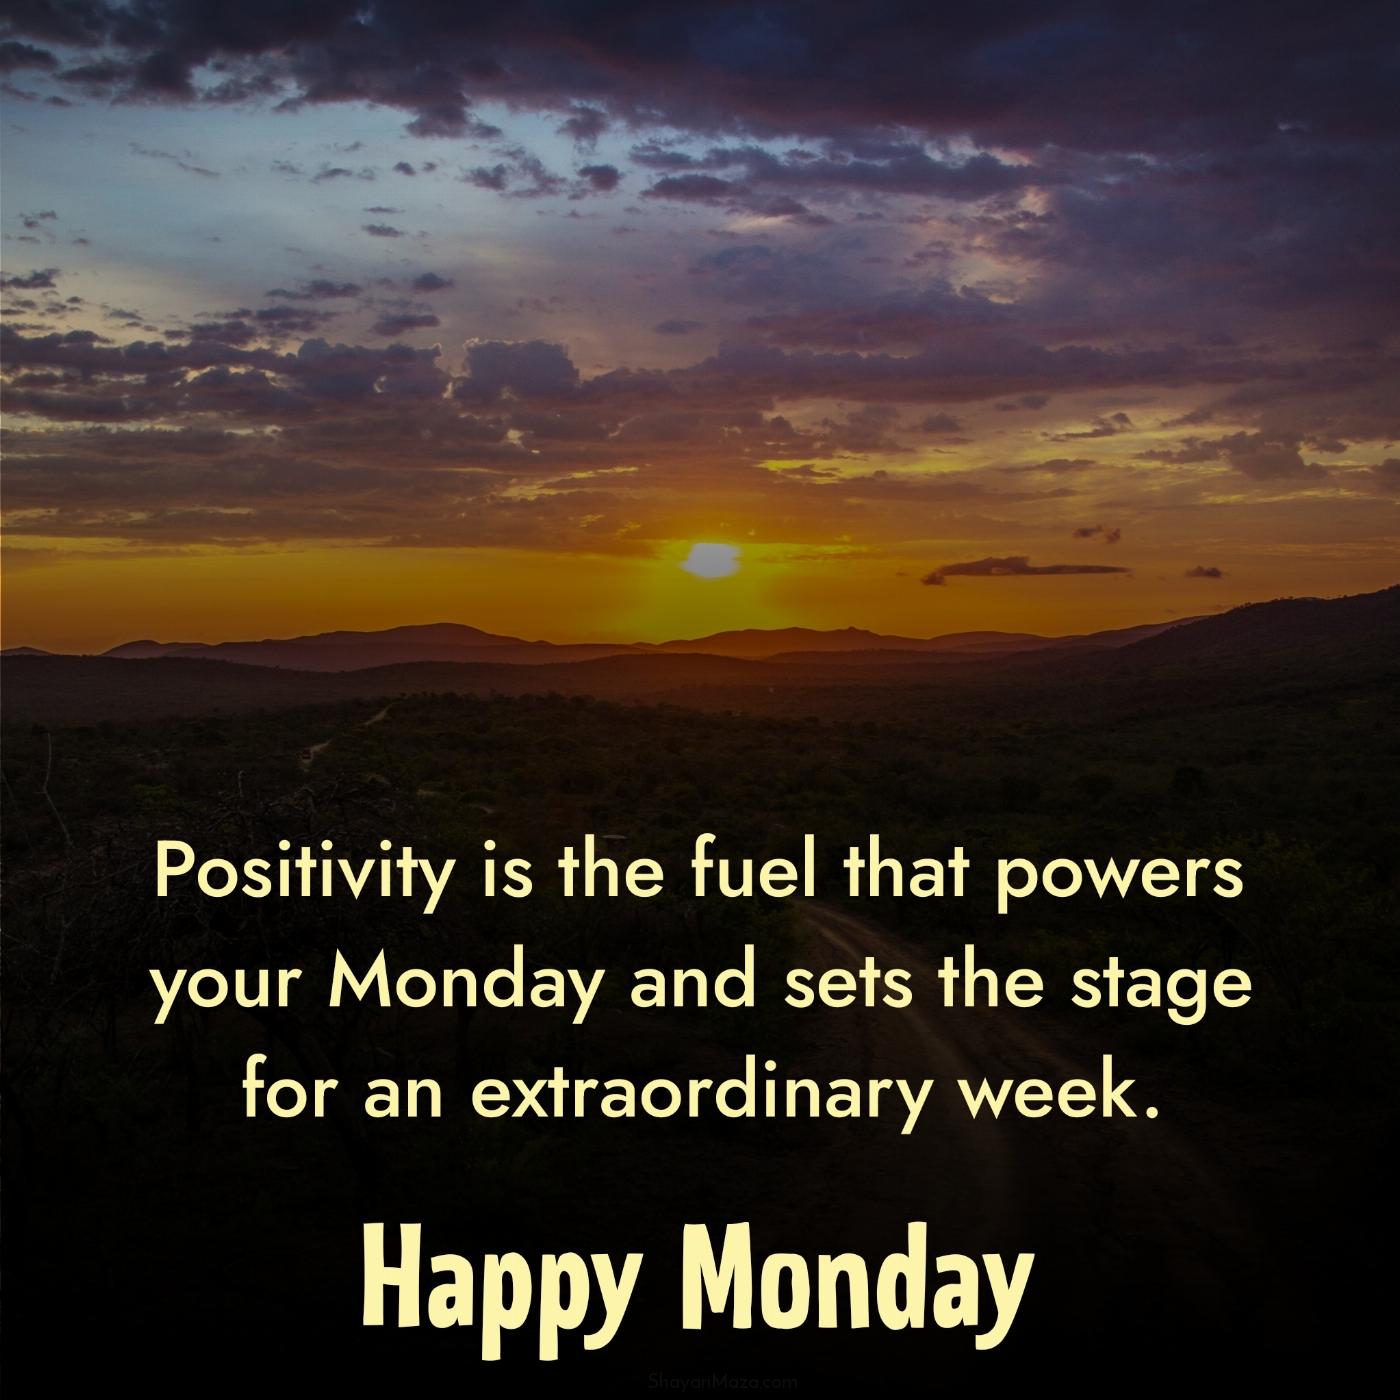 Positivity is the fuel that powers your Monday